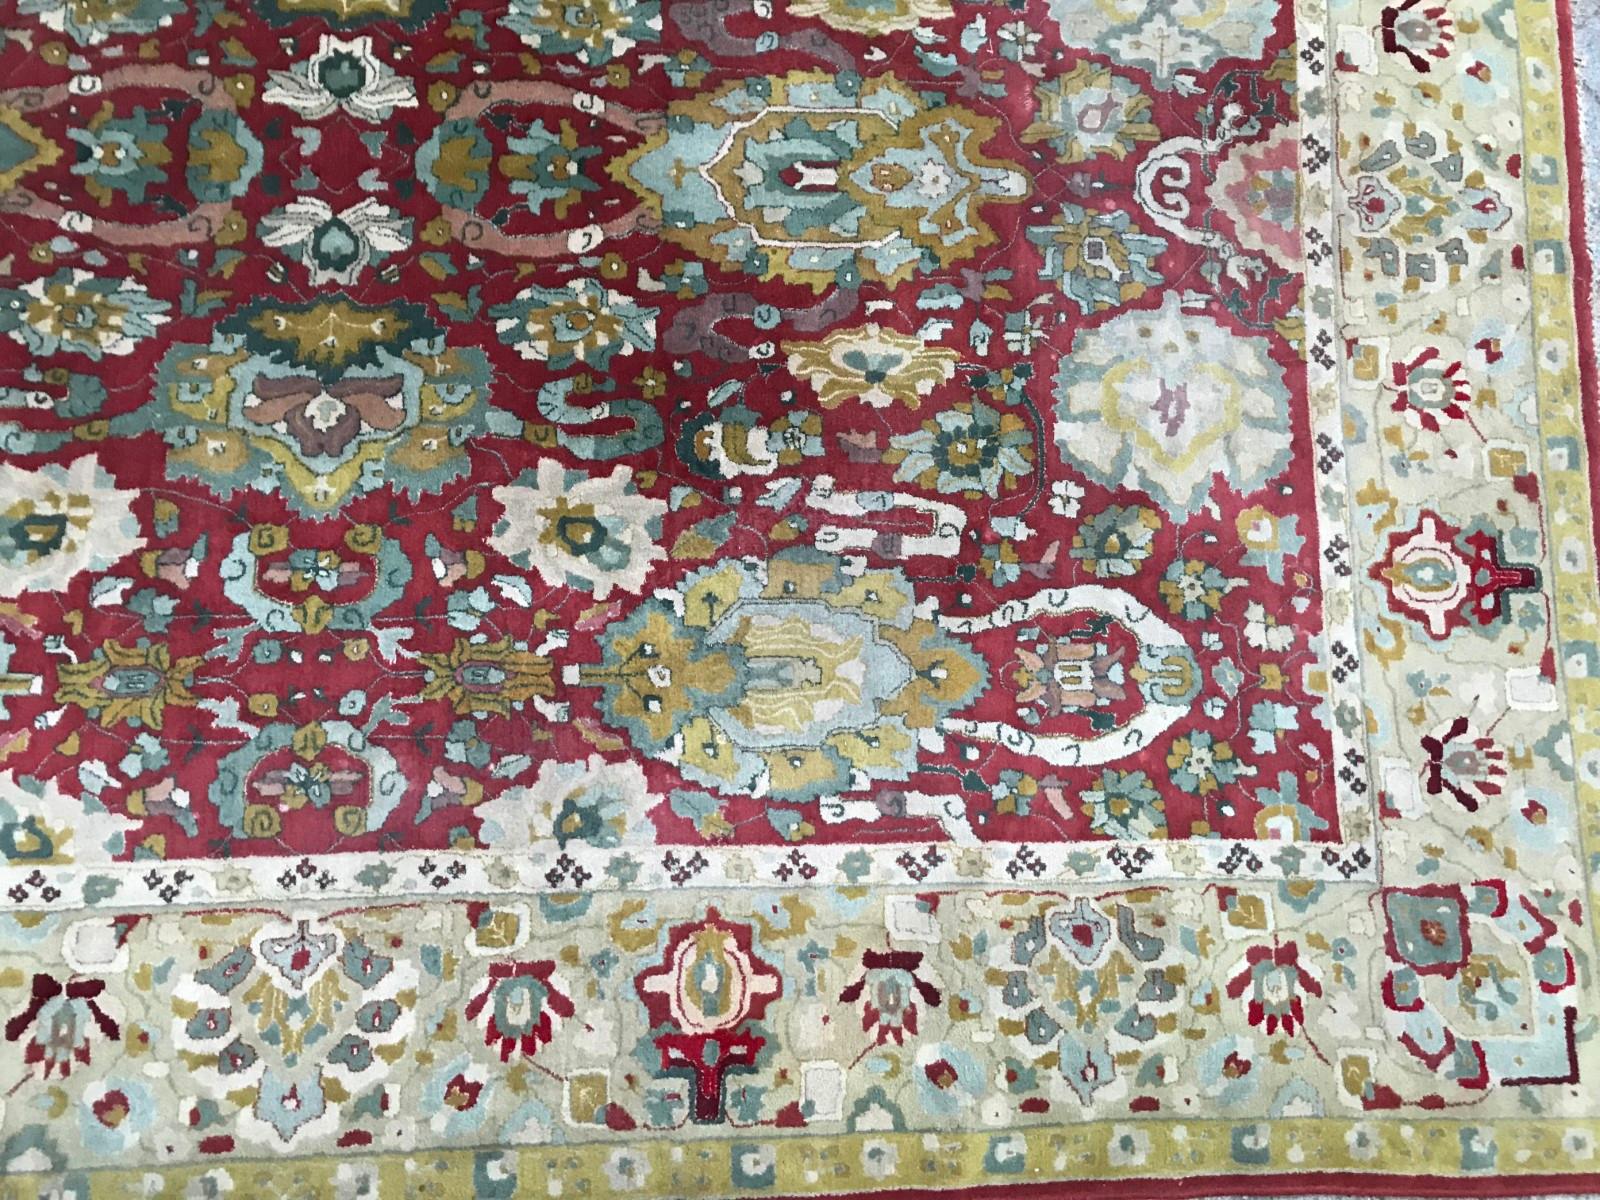 Hand-Crafted Beautiful Large French Janus Rug Agra Design